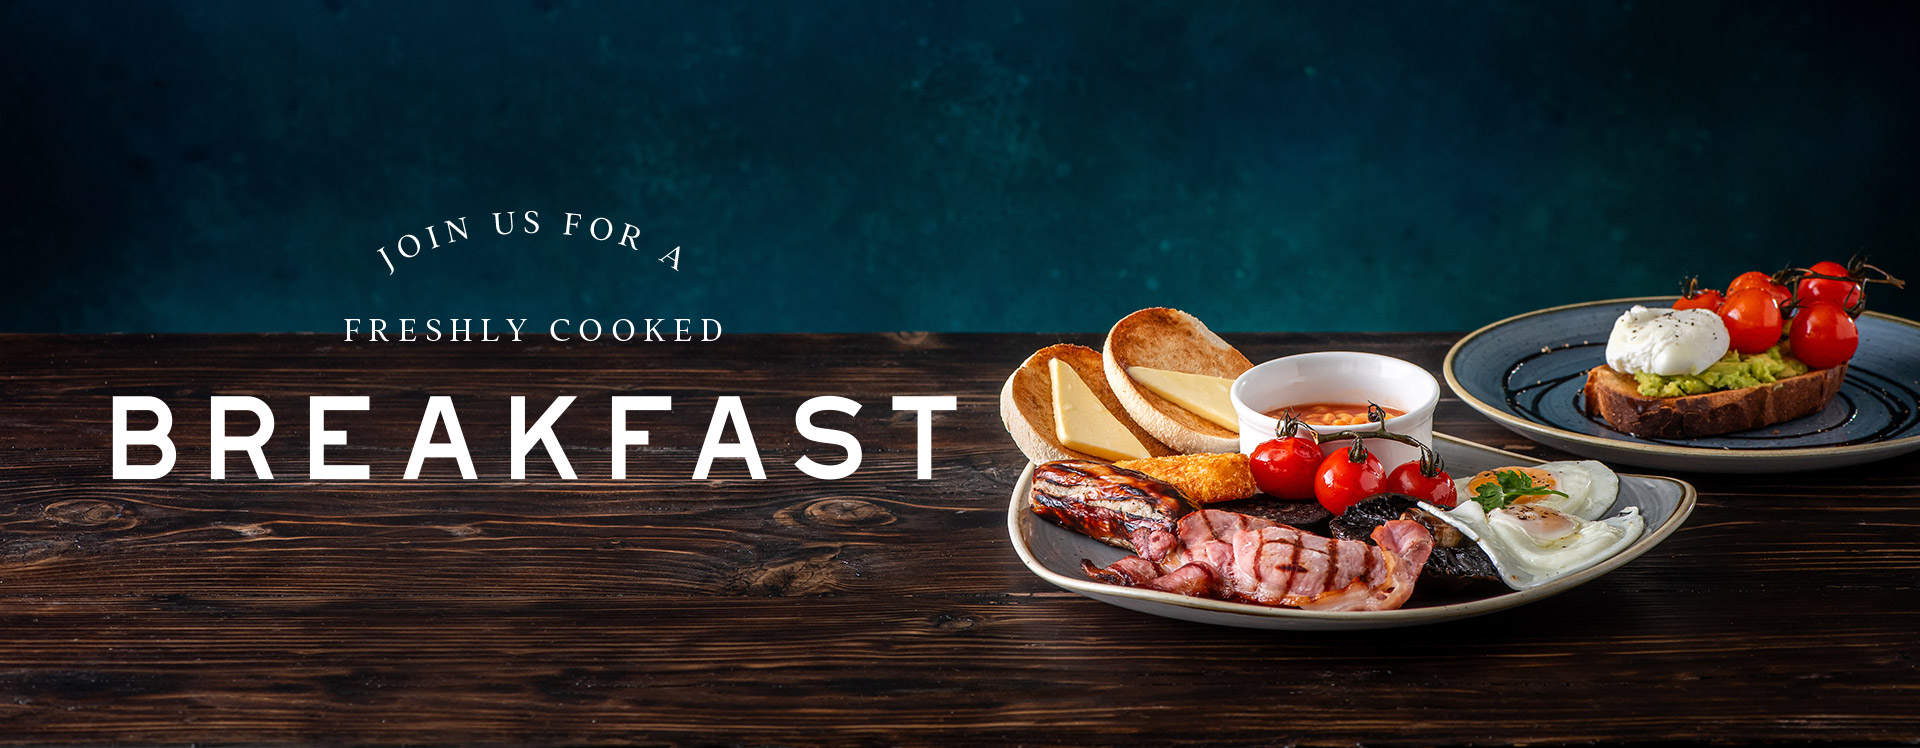 Breakfast at Shakespeare Lower Temple Street - Book a table